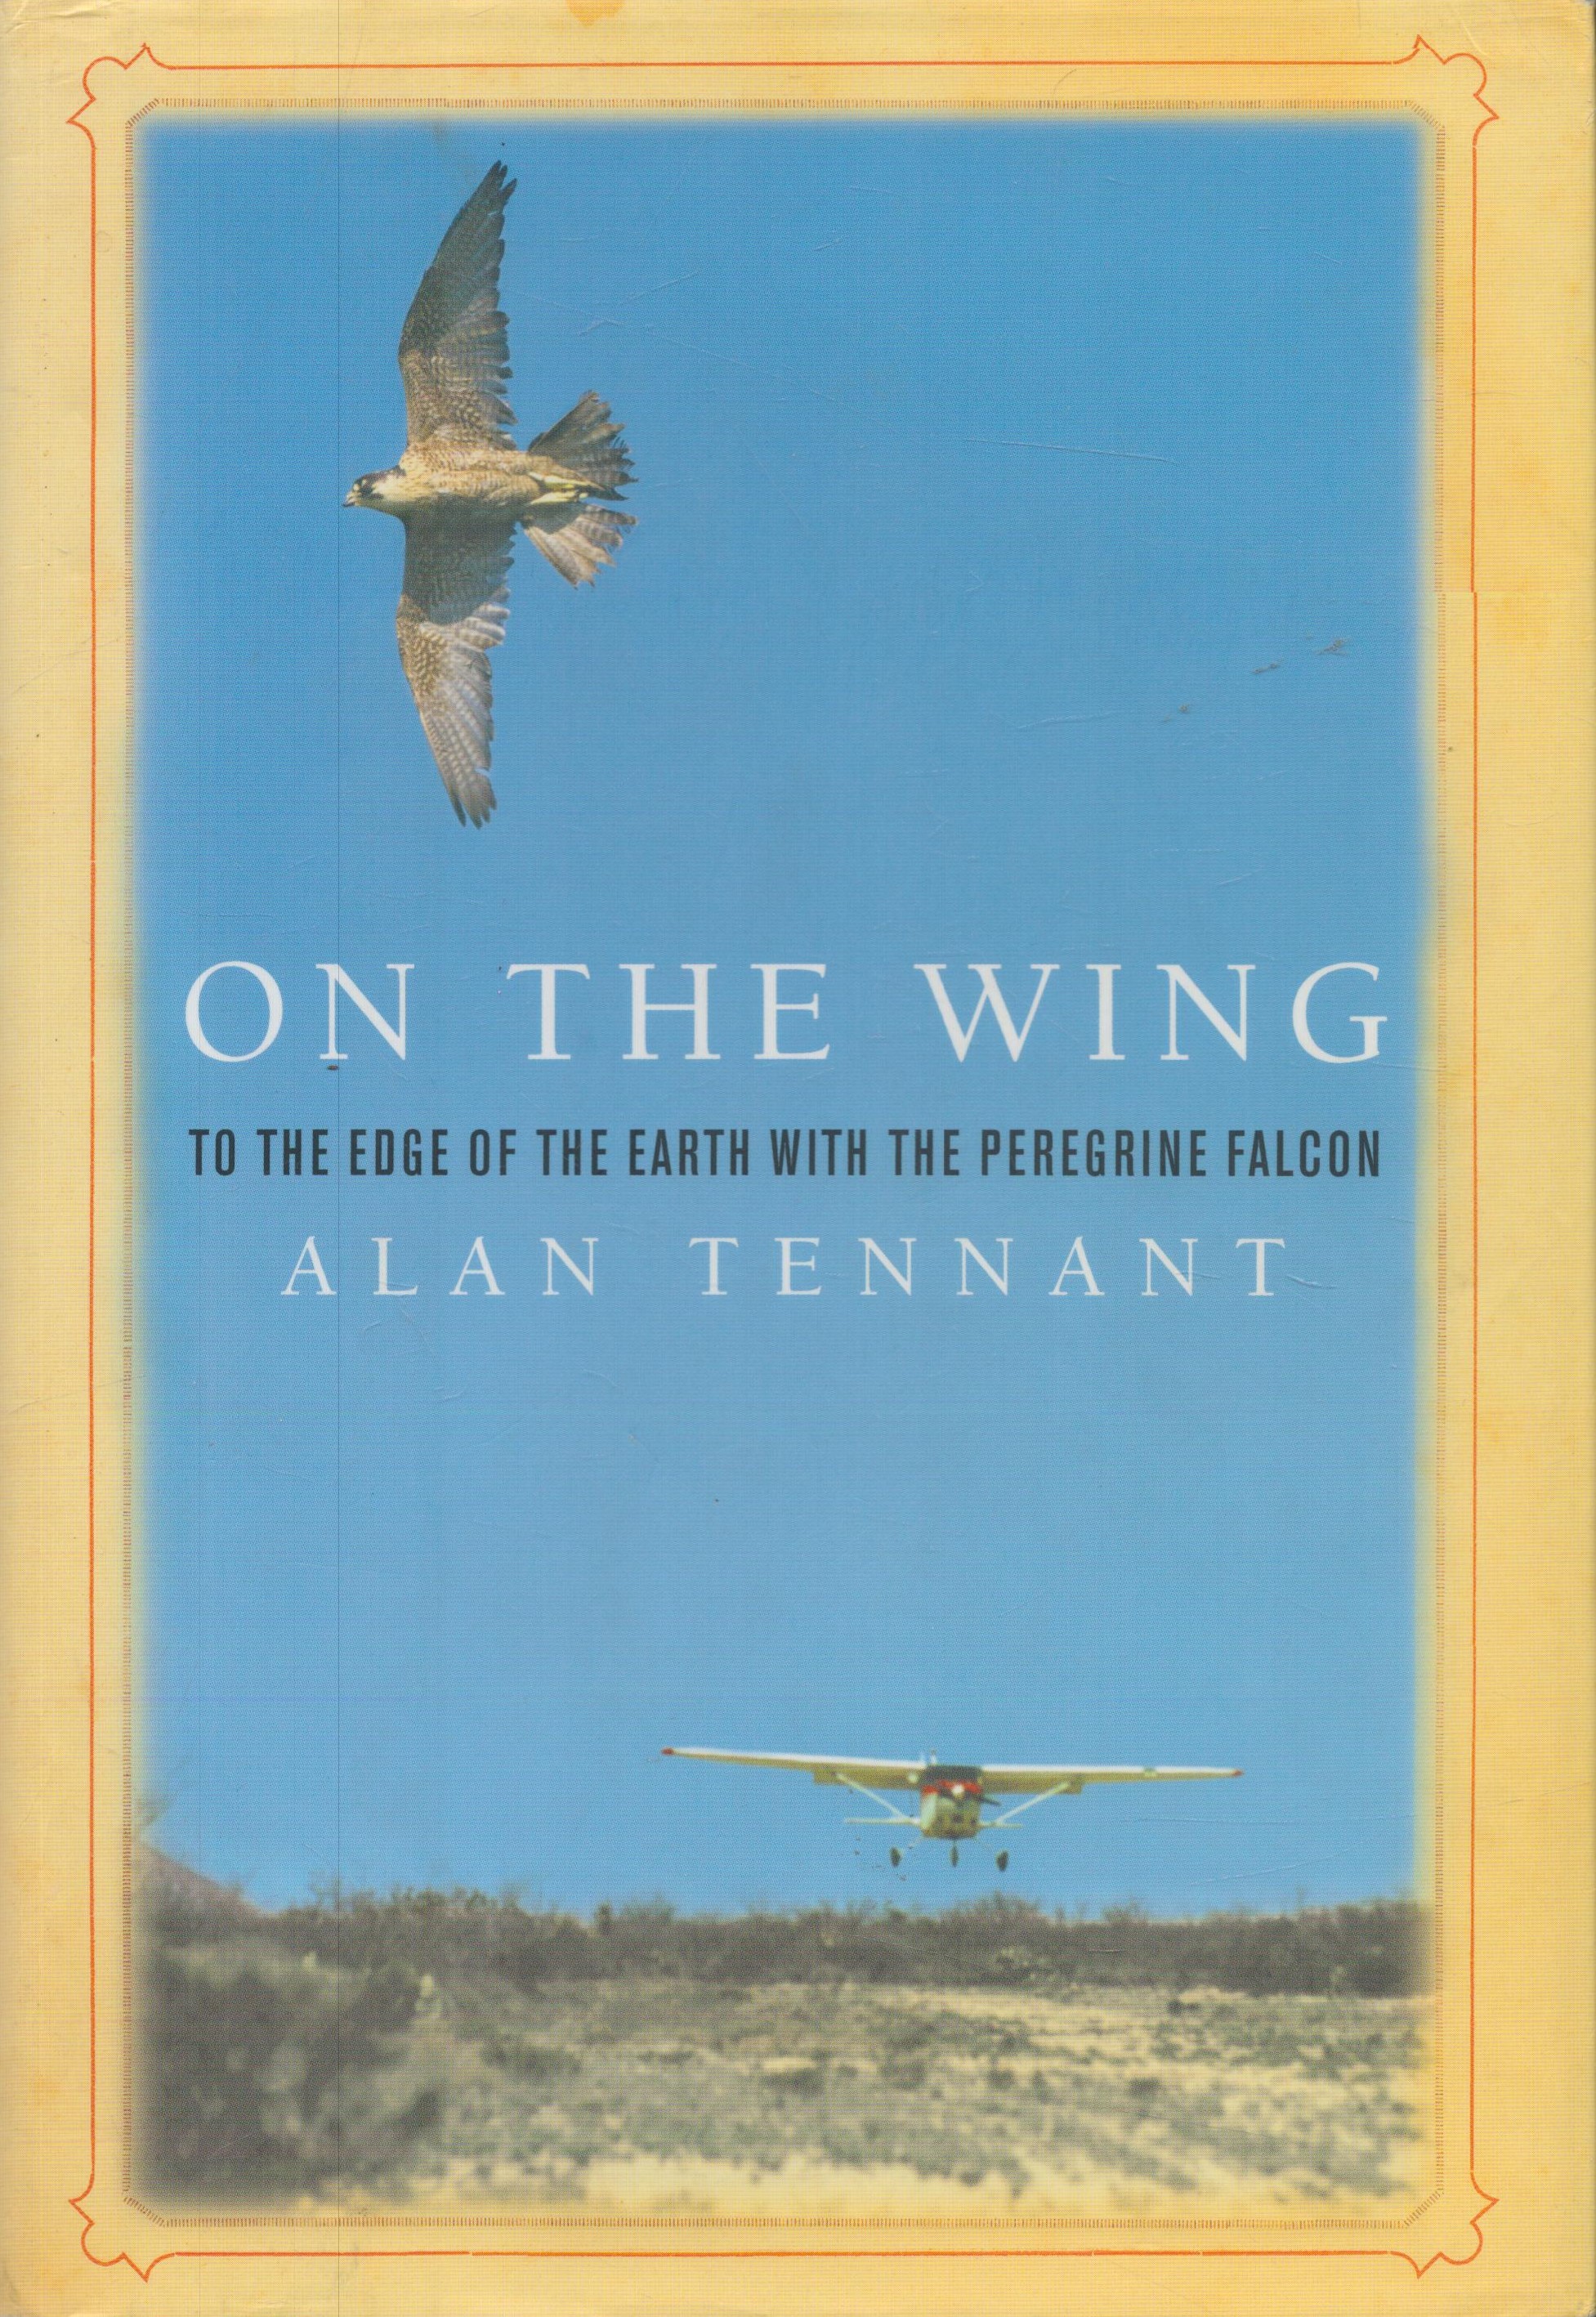 Alan Tennant Signed Book On The Wing To the Edge of the Earth with the Perigrine Falcon by Alan - Image 3 of 9